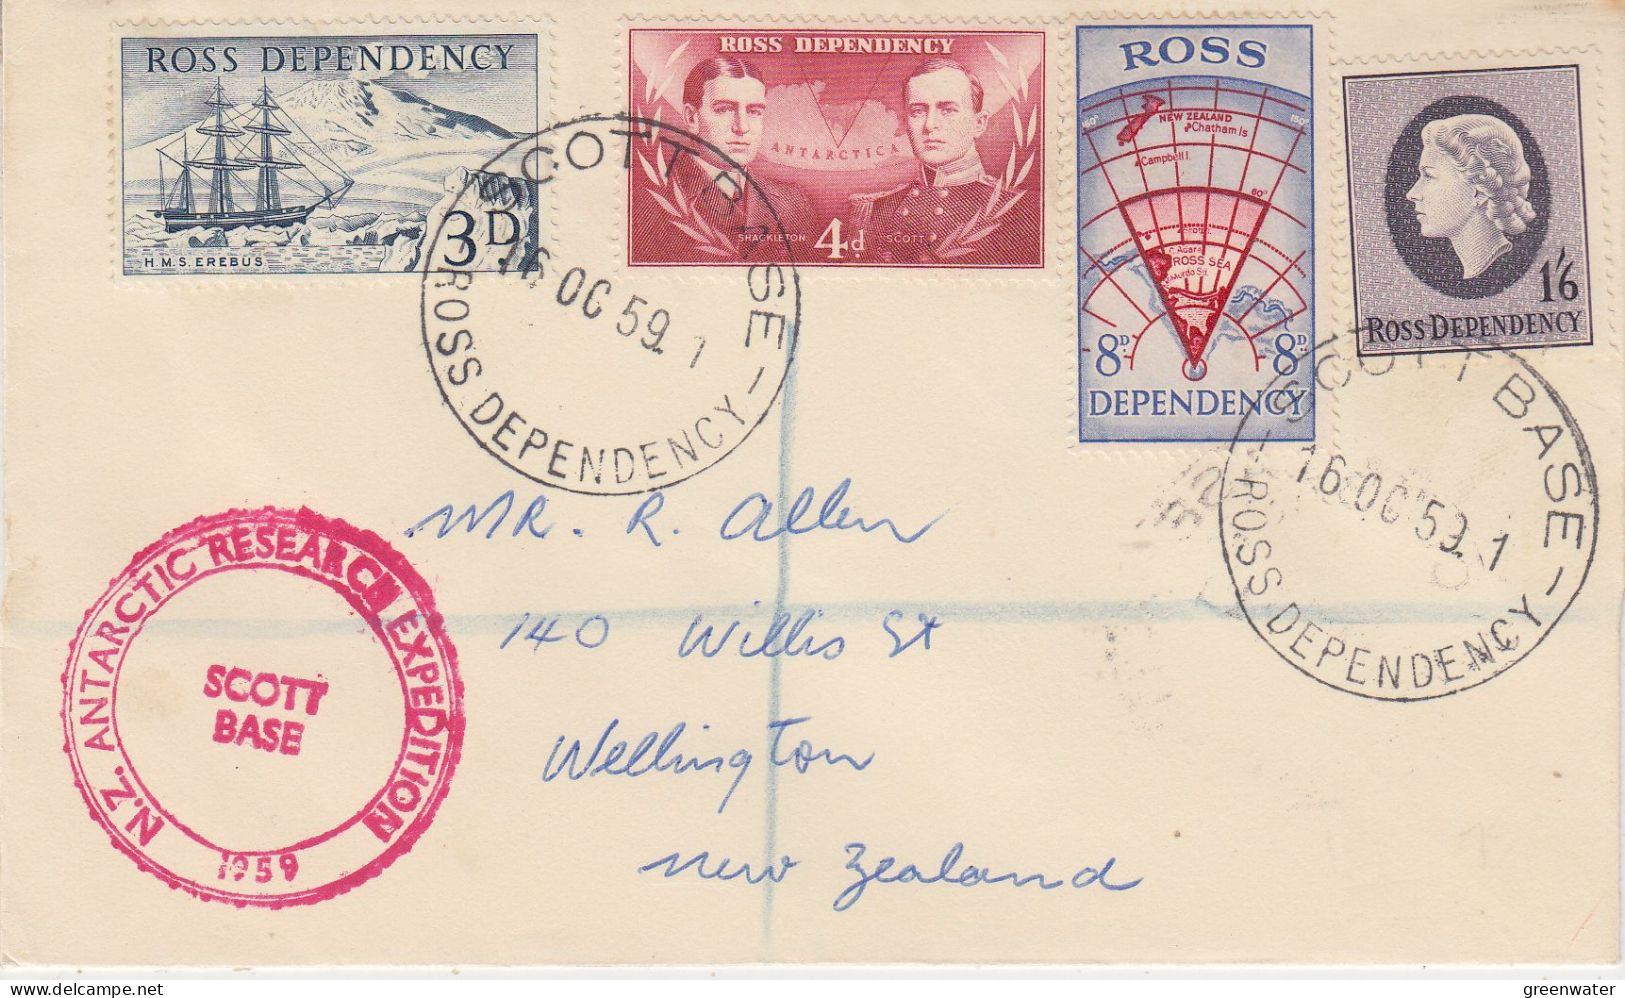 Ross Dependency 1959 NZ Antarctic Research Expedition Registered Cover  Ca Scott Base 16 OCT 1959 (SO235) - Storia Postale